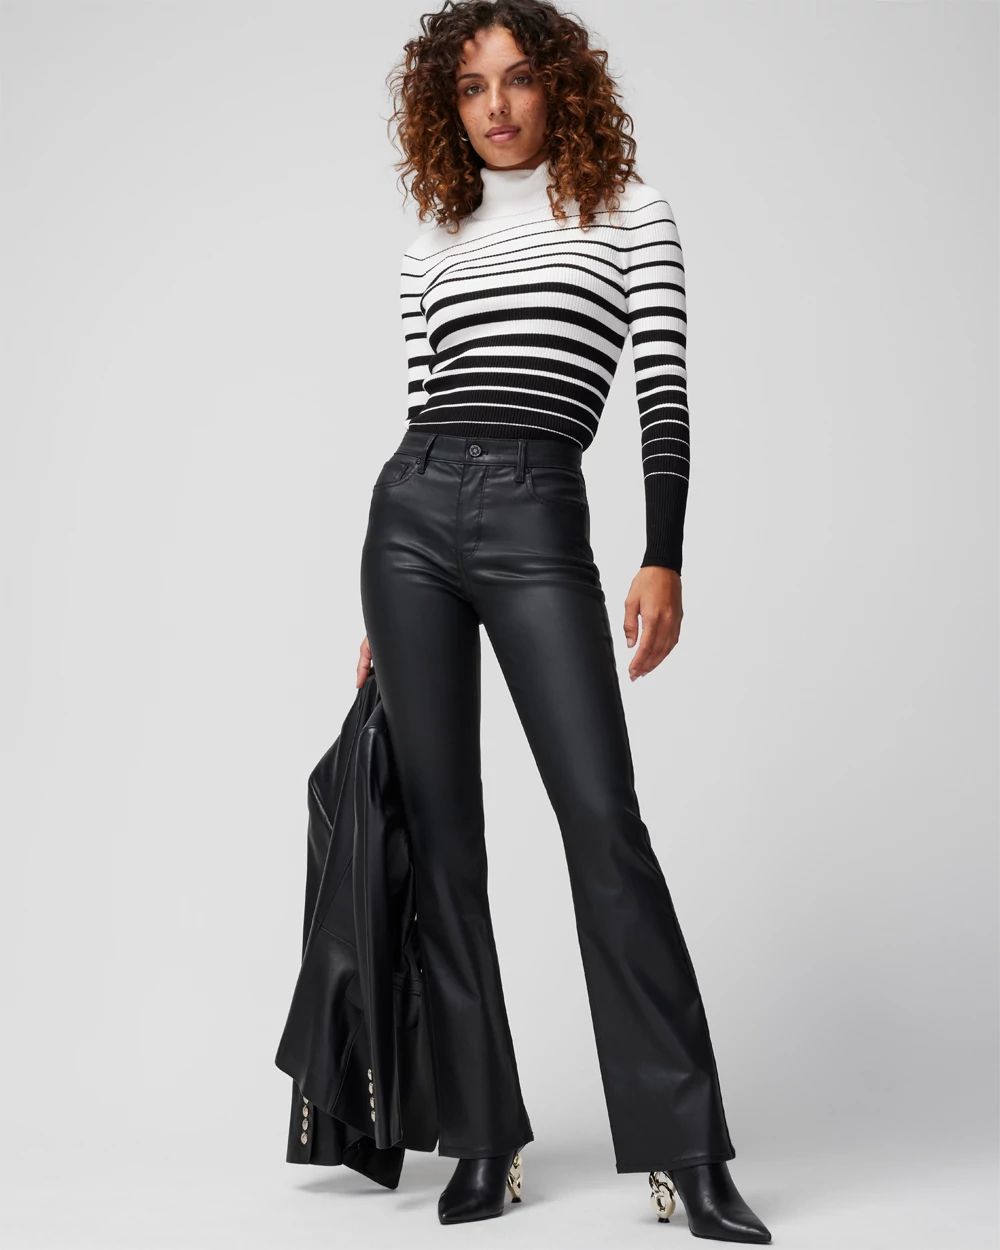 Petite High Rise Coated Bootcut Jeans click to view larger image.